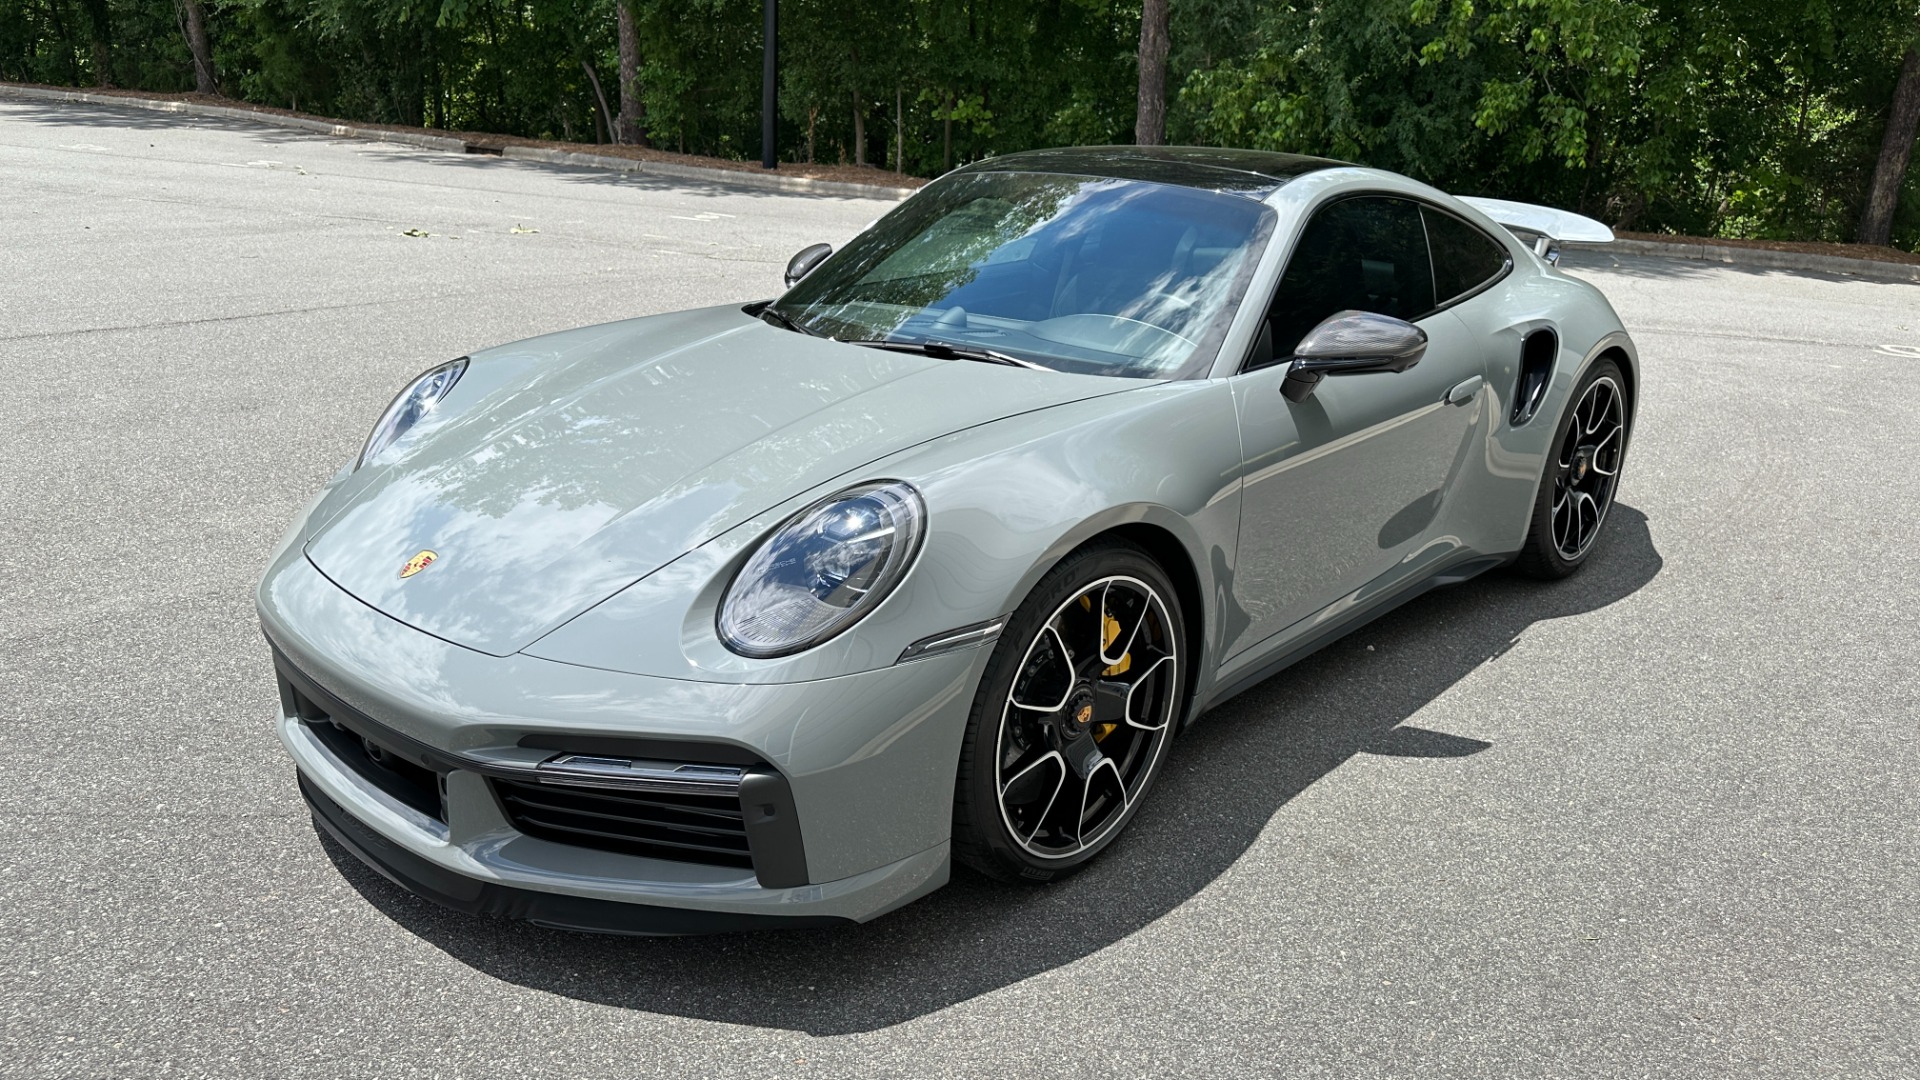 Used 2021 Porsche 911 TURBO S / CUSTOM PTS COLOR / BIG OPTIONS / SPORT SEATS / CARBON FIBER for sale $289,000 at Formula Imports in Charlotte NC 28227 2